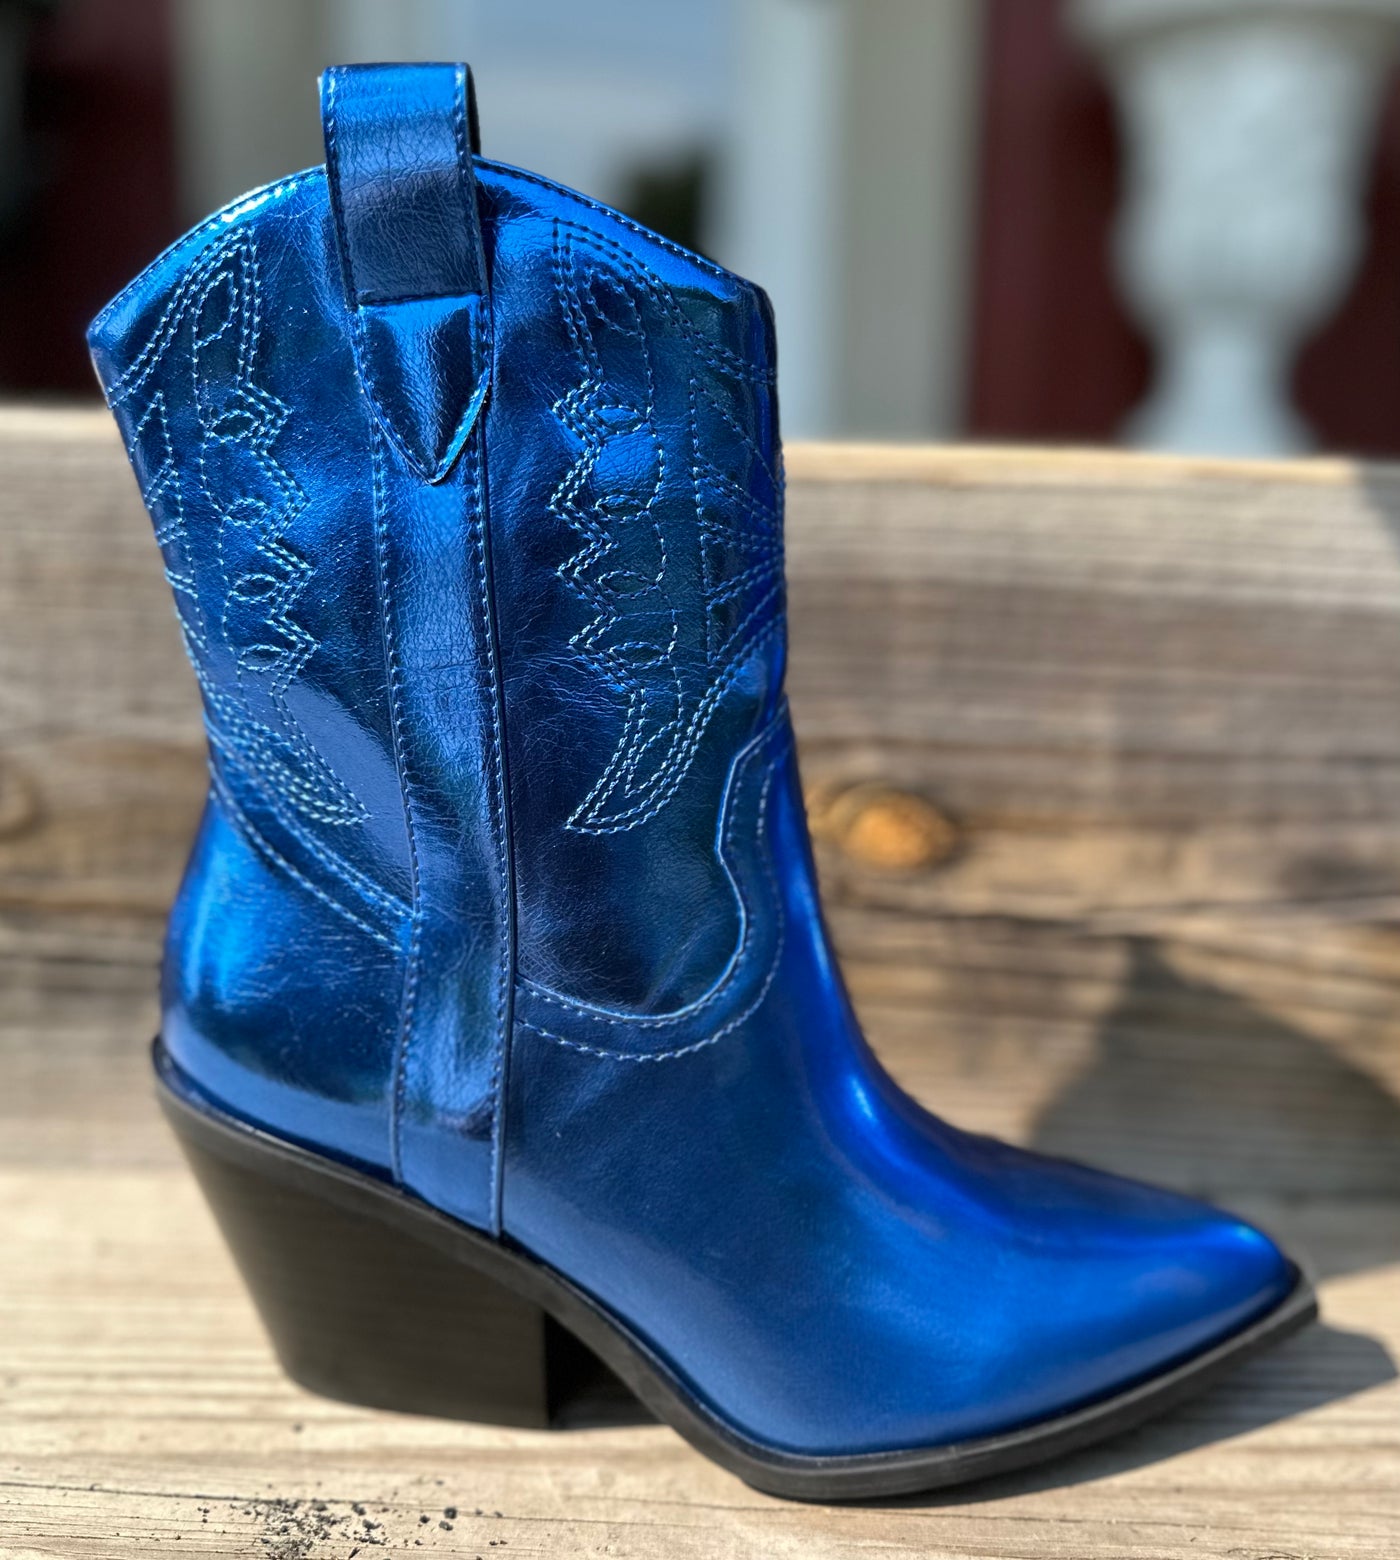 Corky's "Rowdy" Boots in Electric Blue